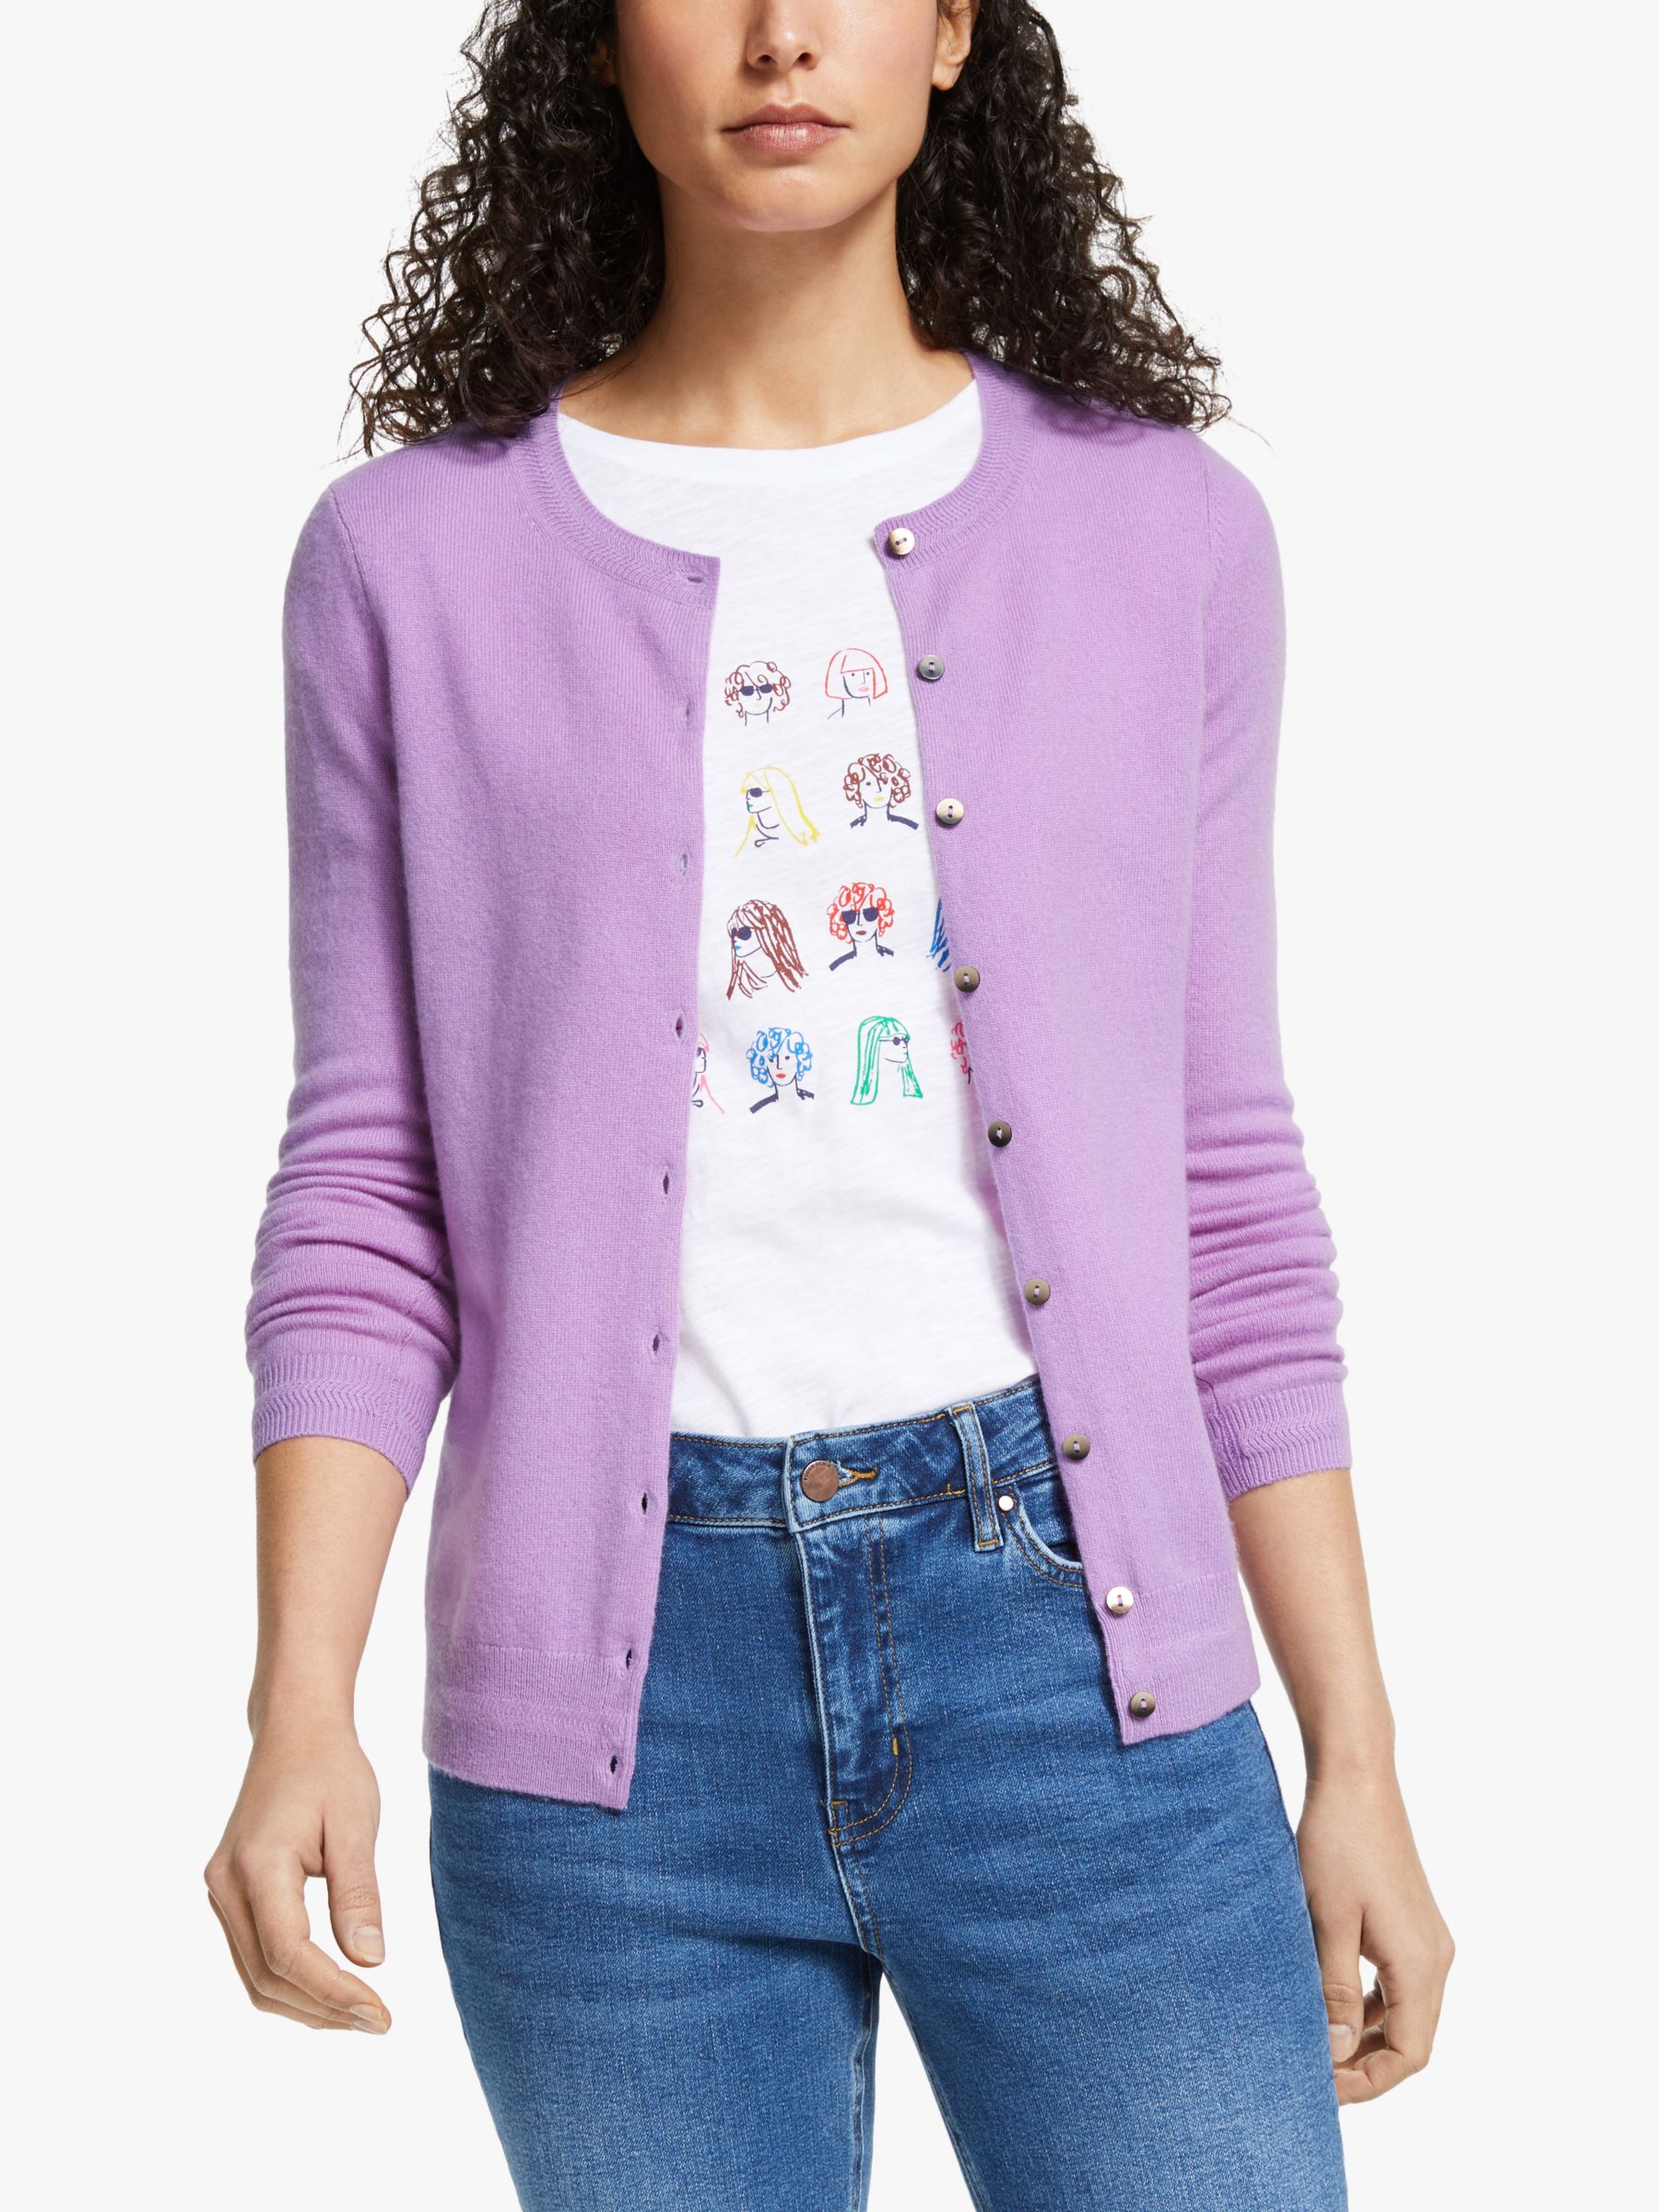 Boden Cashmere Crew Neck Cardigan, Lupin